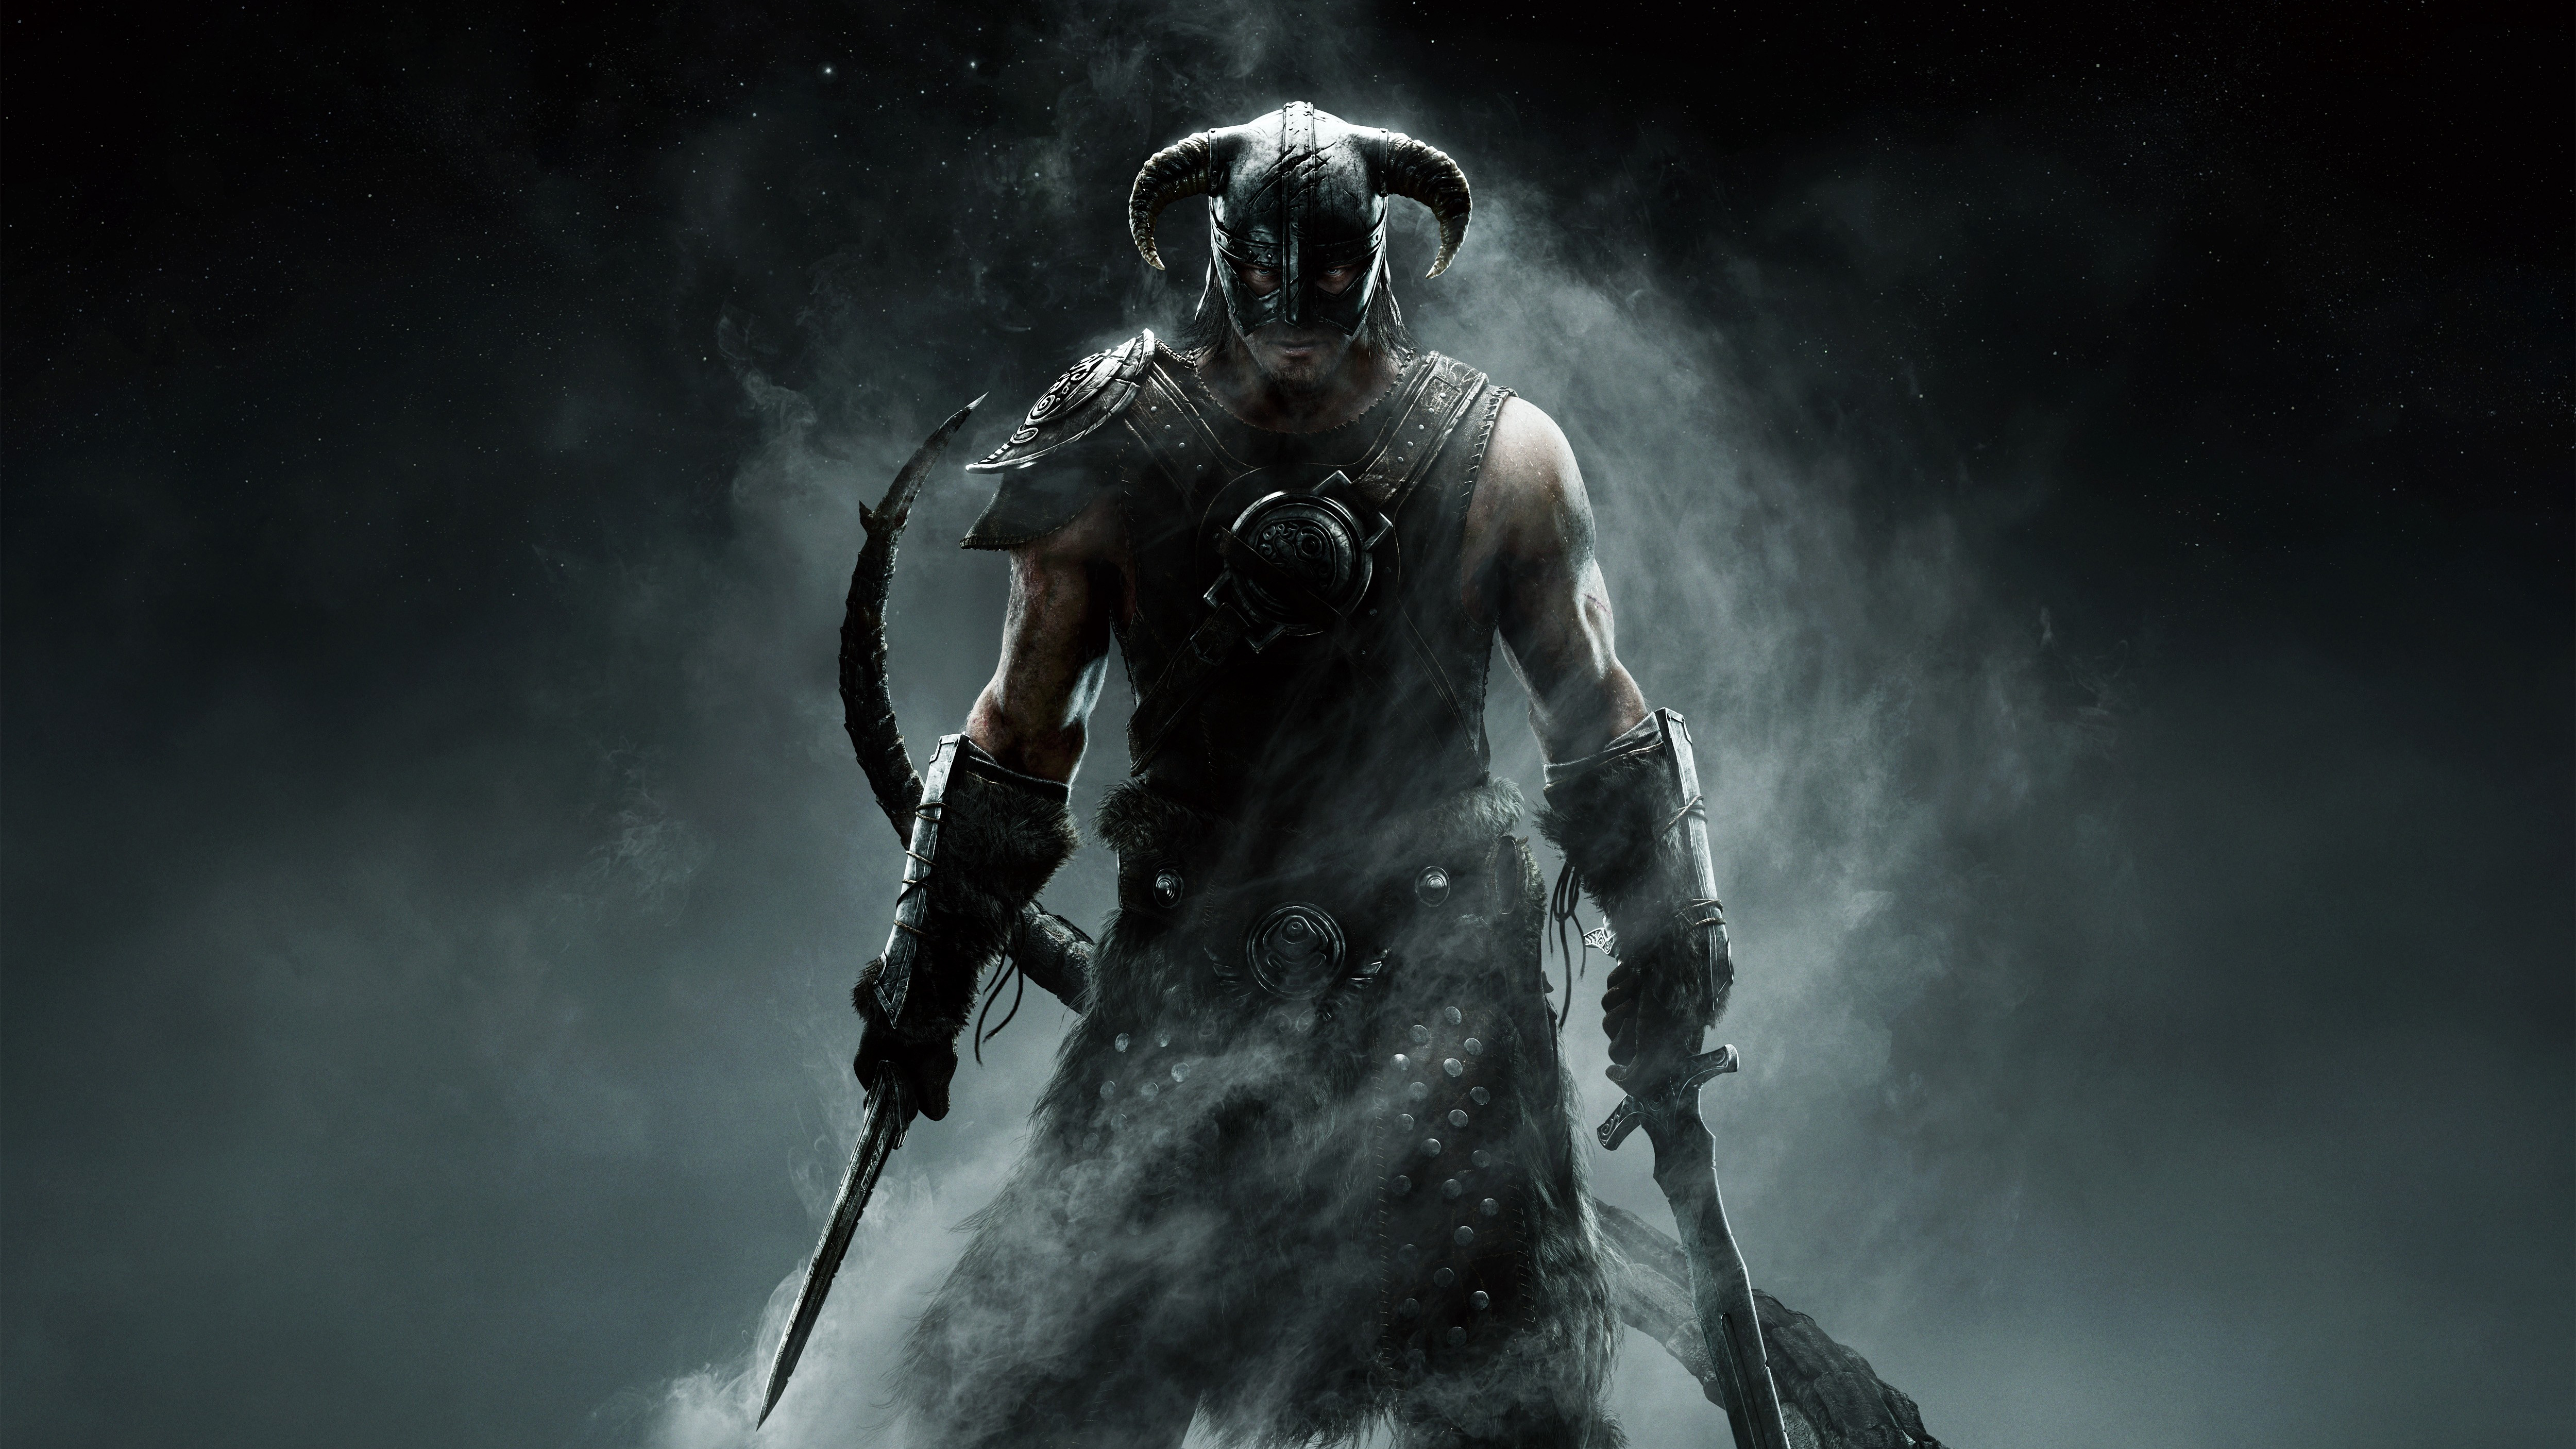 The elder scrolls v skyrim k hd games k wallpapers images backgrounds photos and pictures